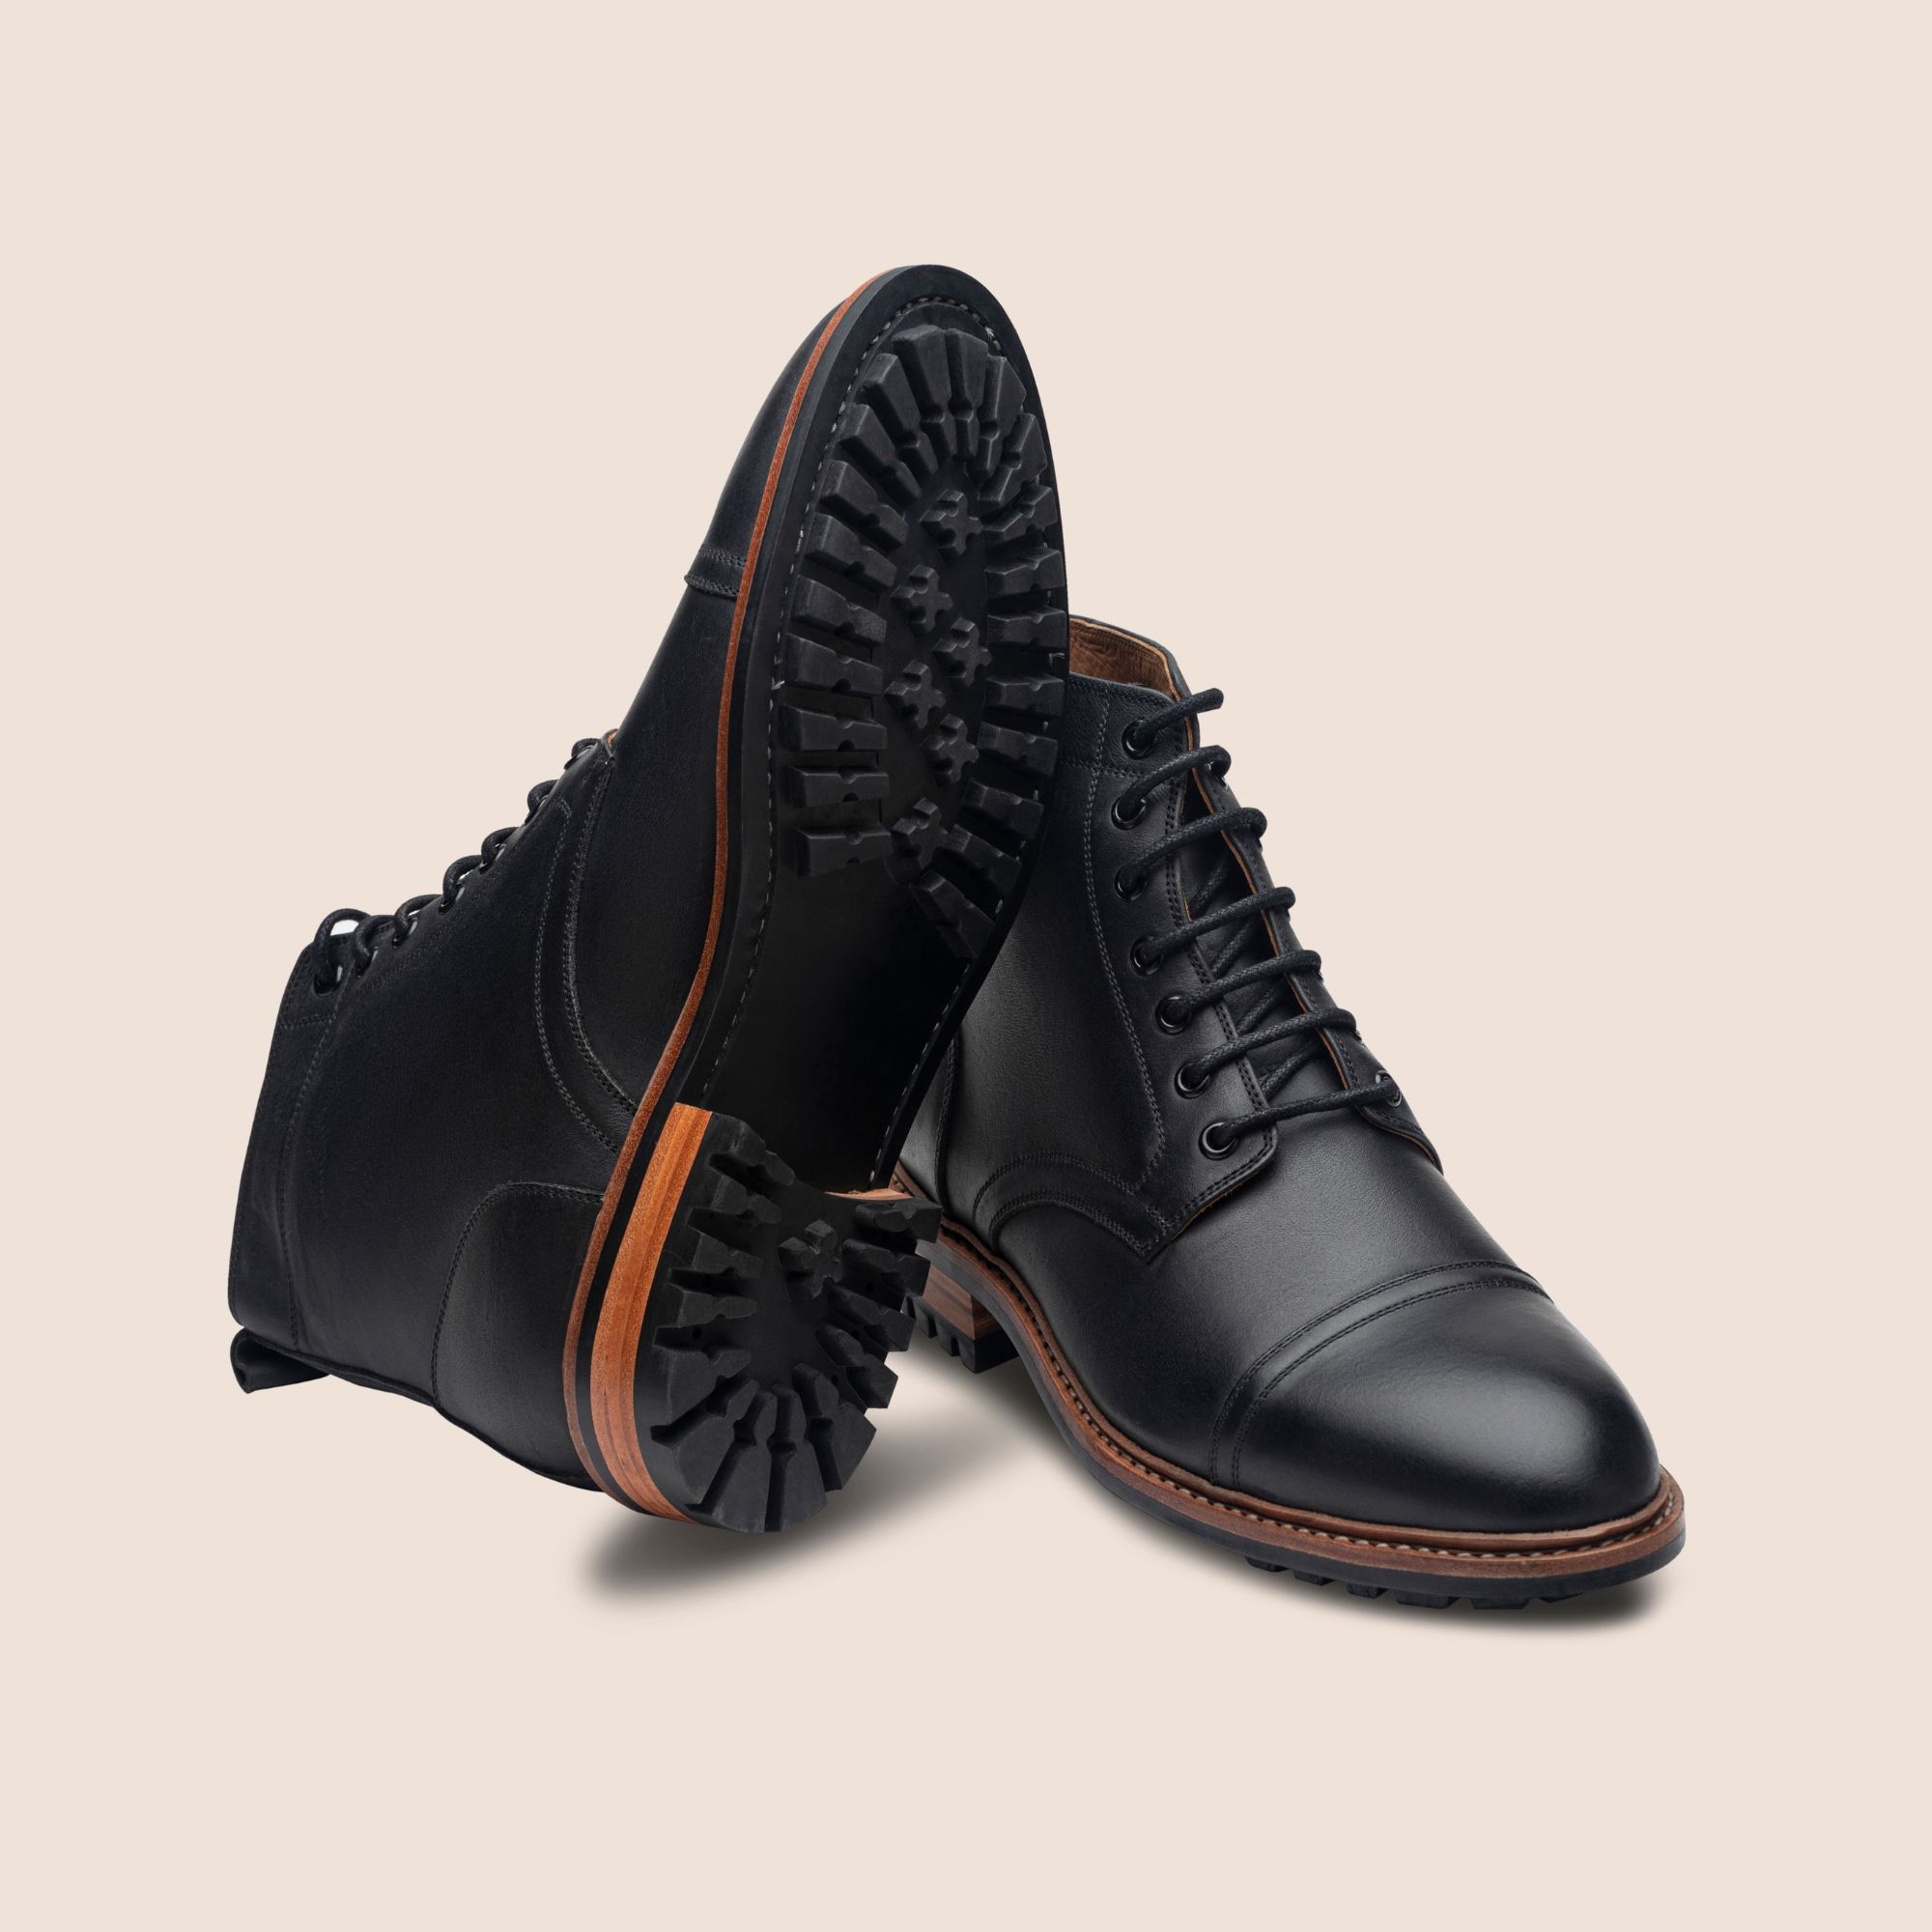 Goodyear Welted black captoe leather boots in oil pull up leather